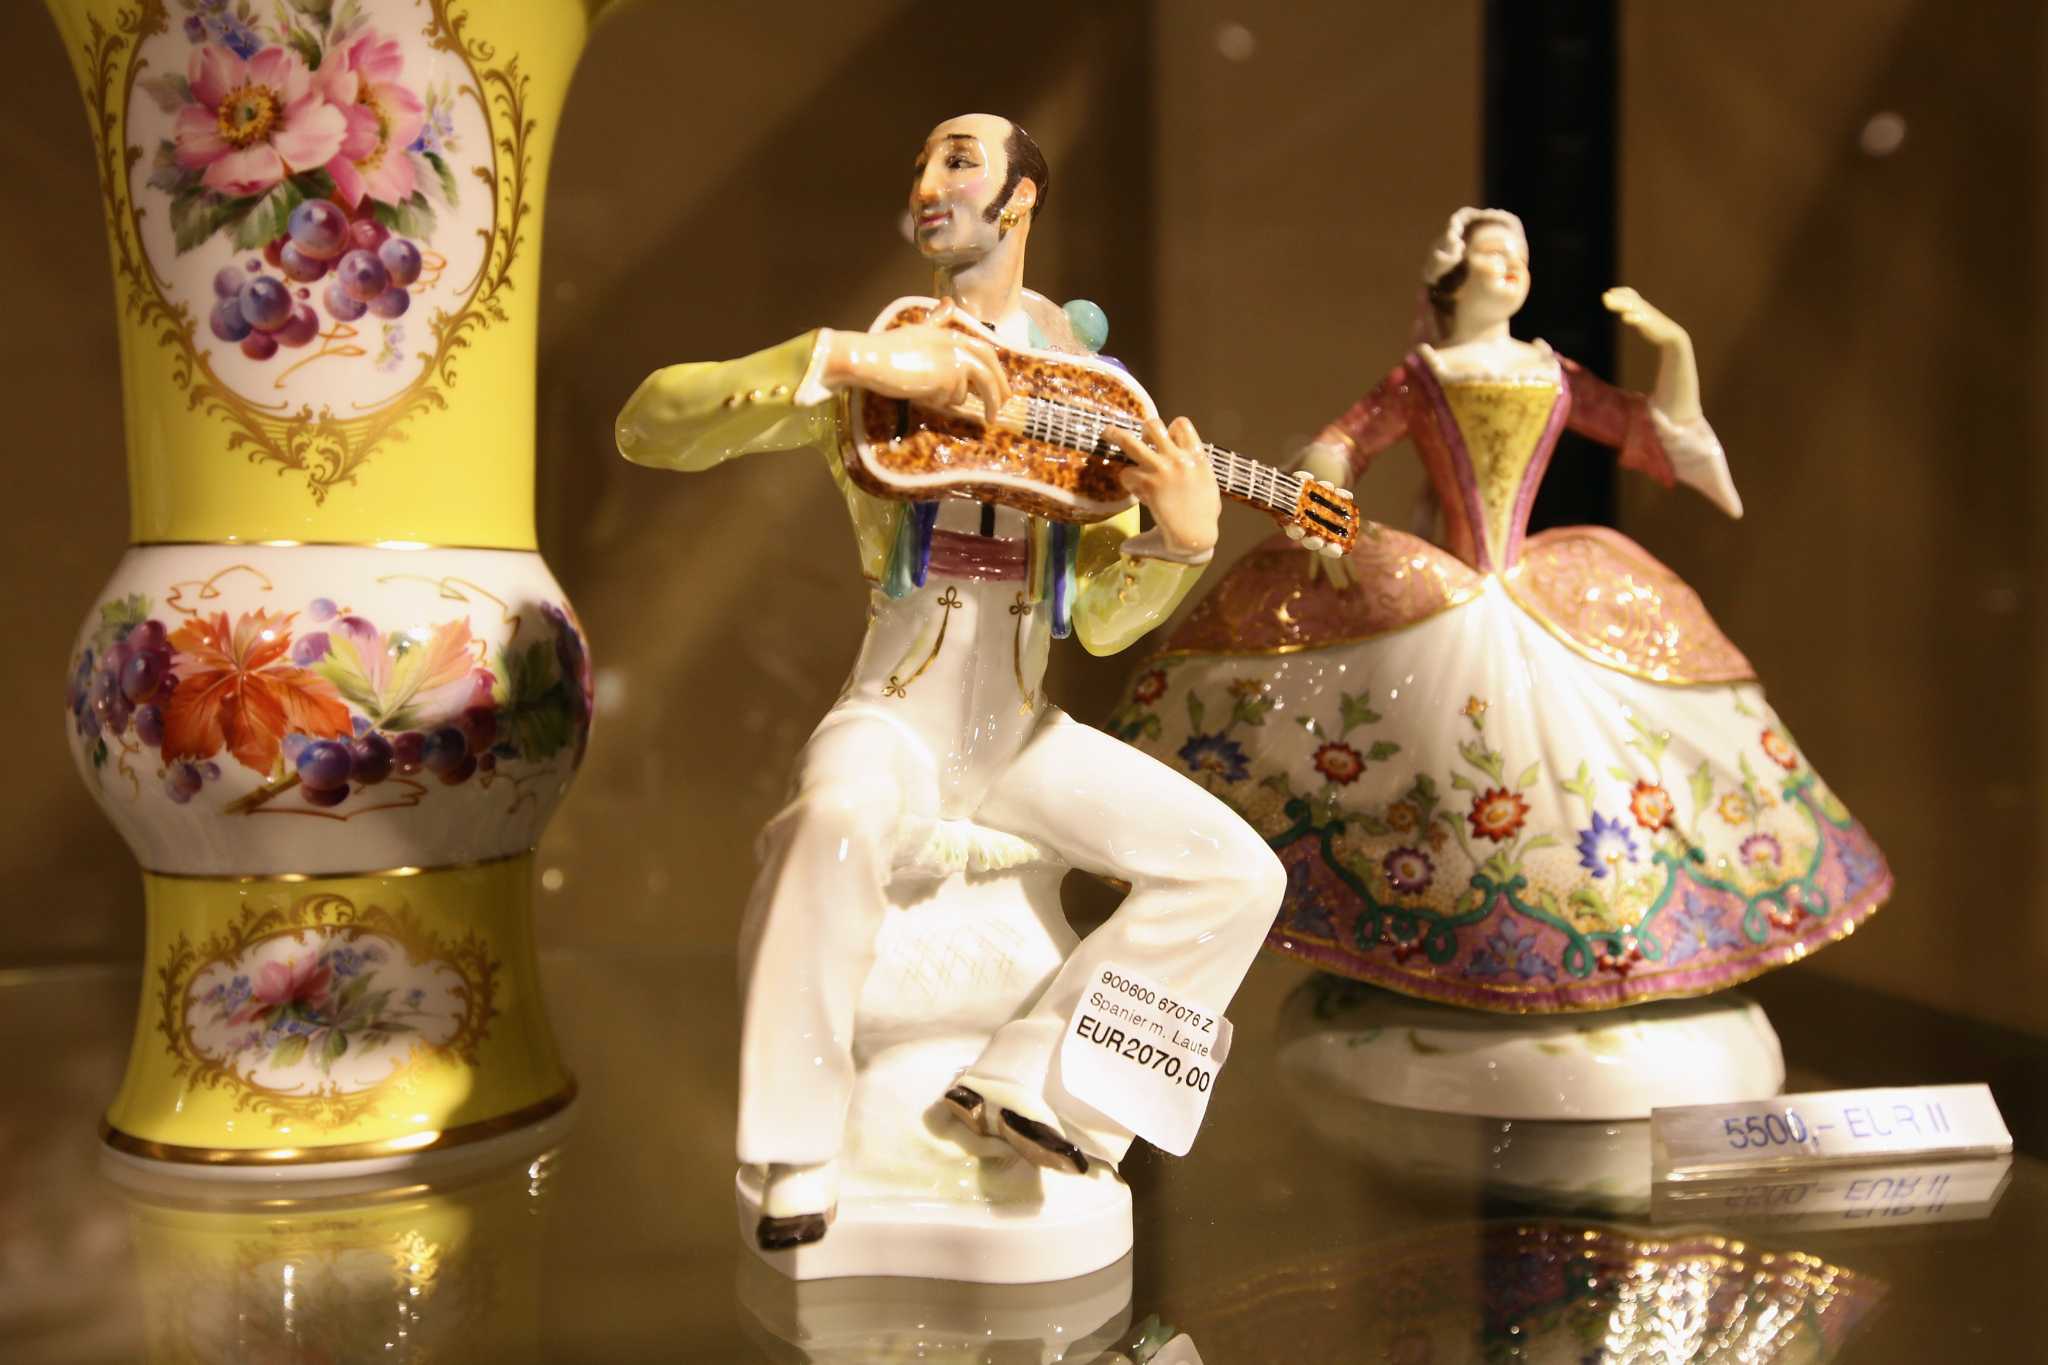 How to Tell Porcelain Figurines From Ceramic